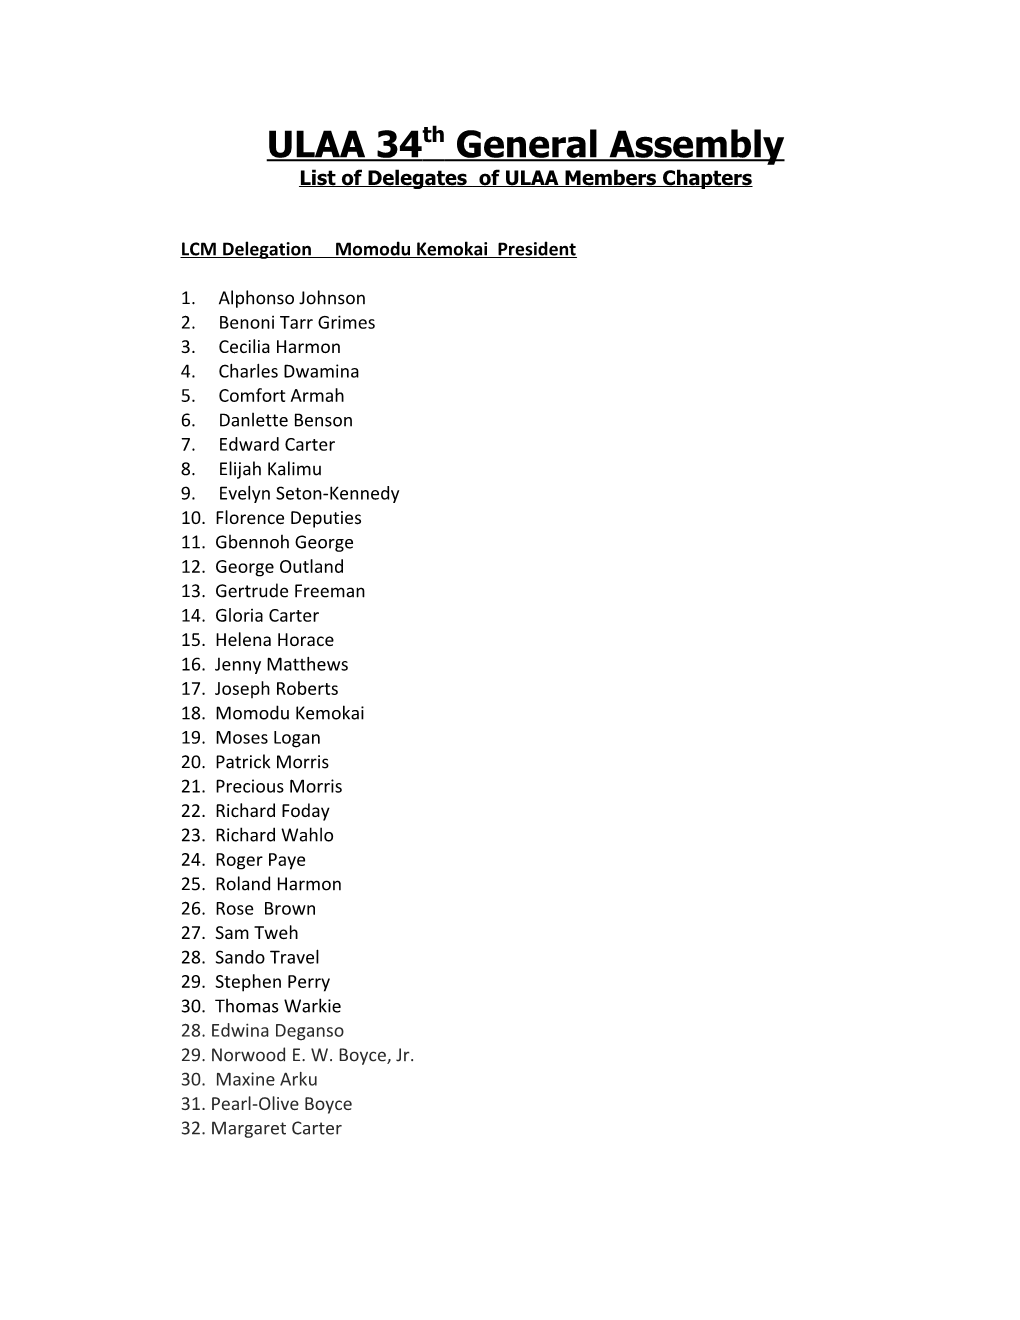 List of Delegates of ULAA Members Chapters